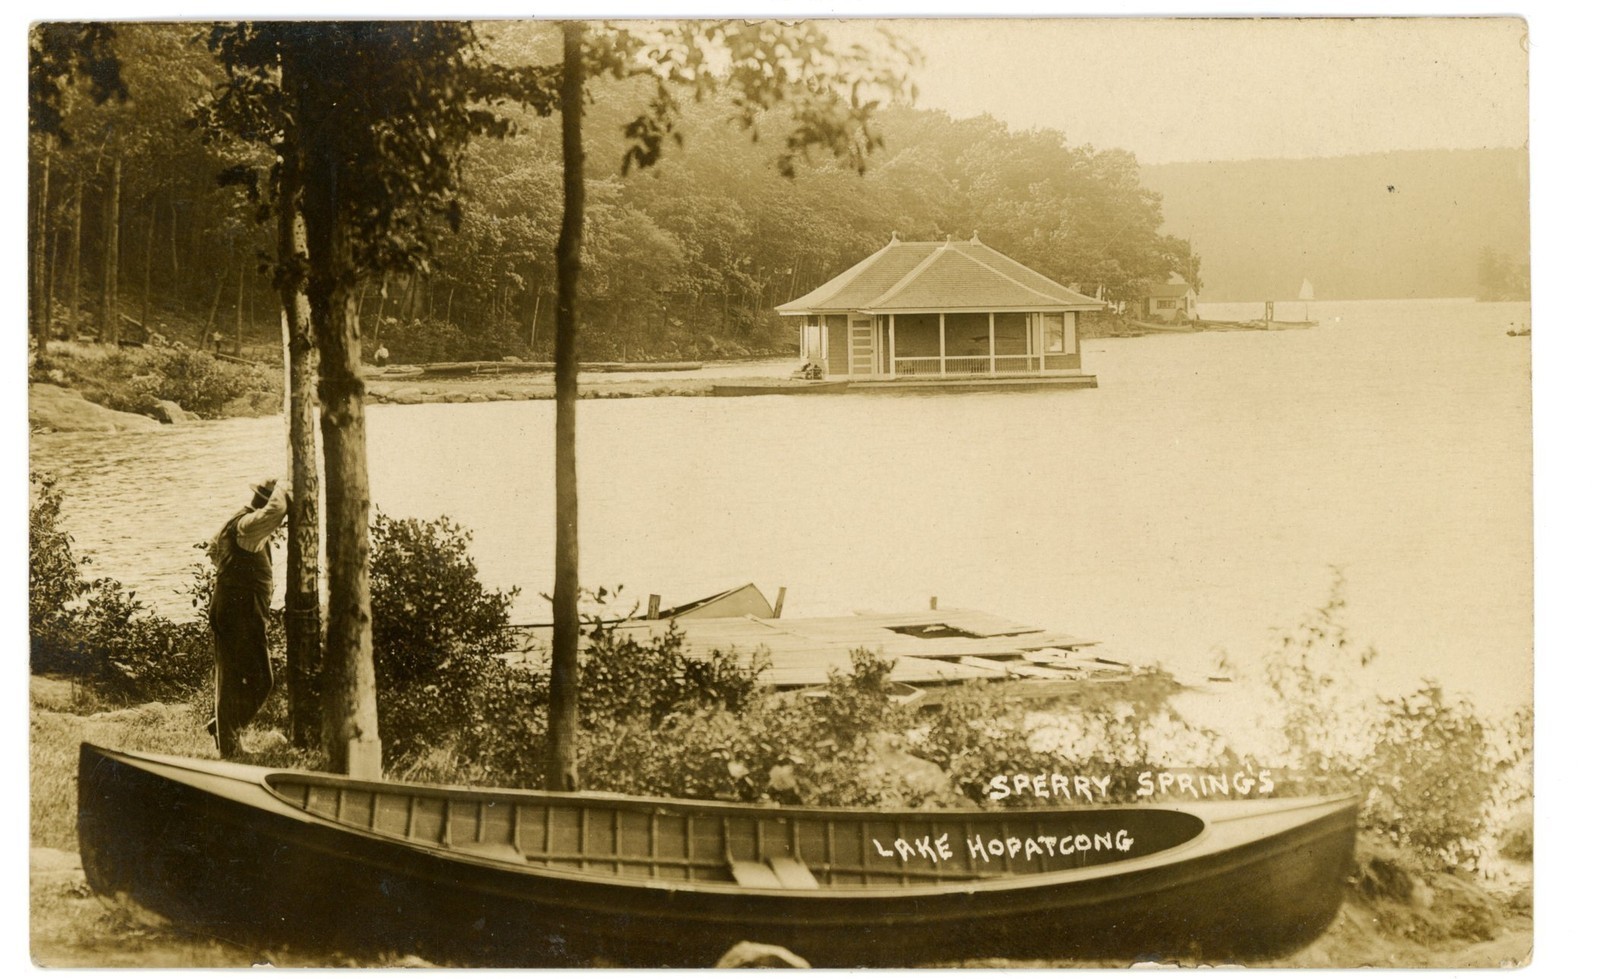 Lake Hopatcong - Sperry Springspossibly - Otherwise along the lake - c 1910